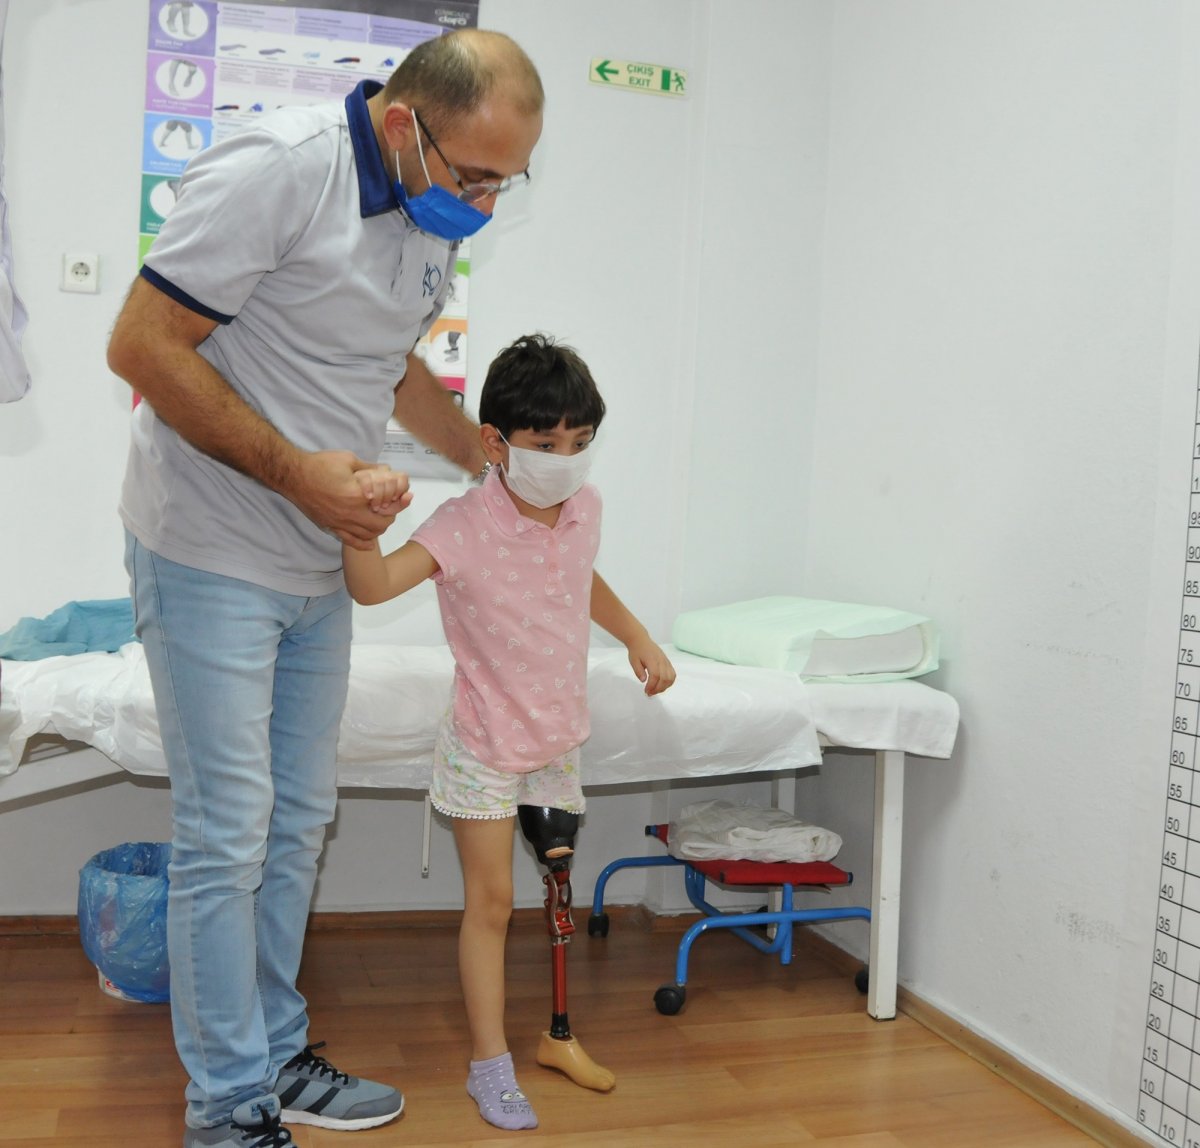 30 thousand TL is needed for a silicone prosthesis for Özge, whose leg was amputated in Antalya #4